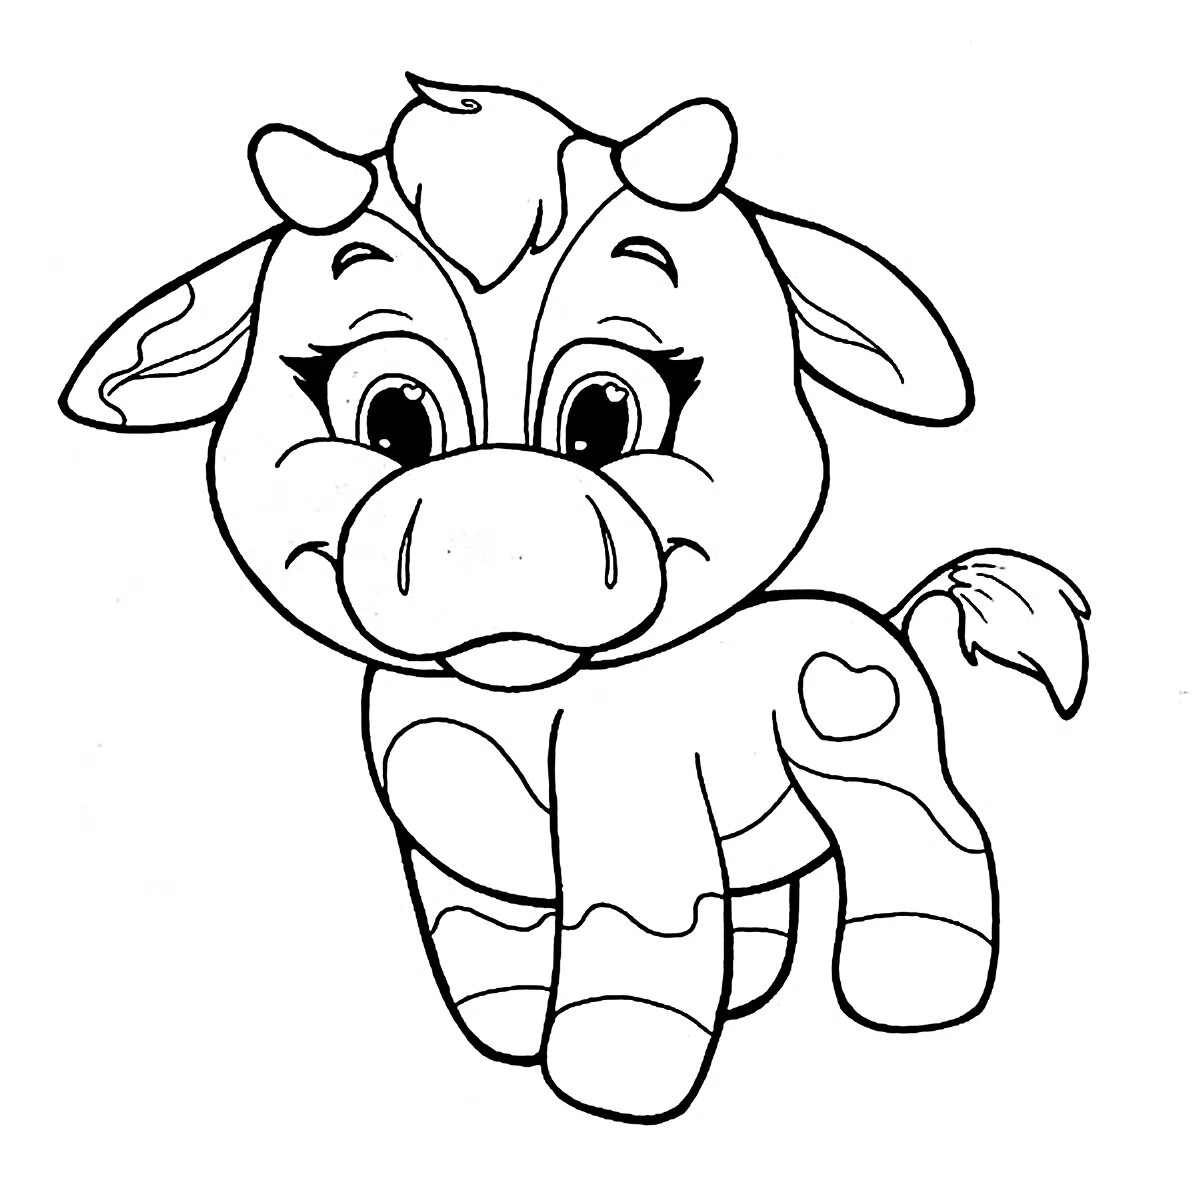 Coloring page sparkling cute cow